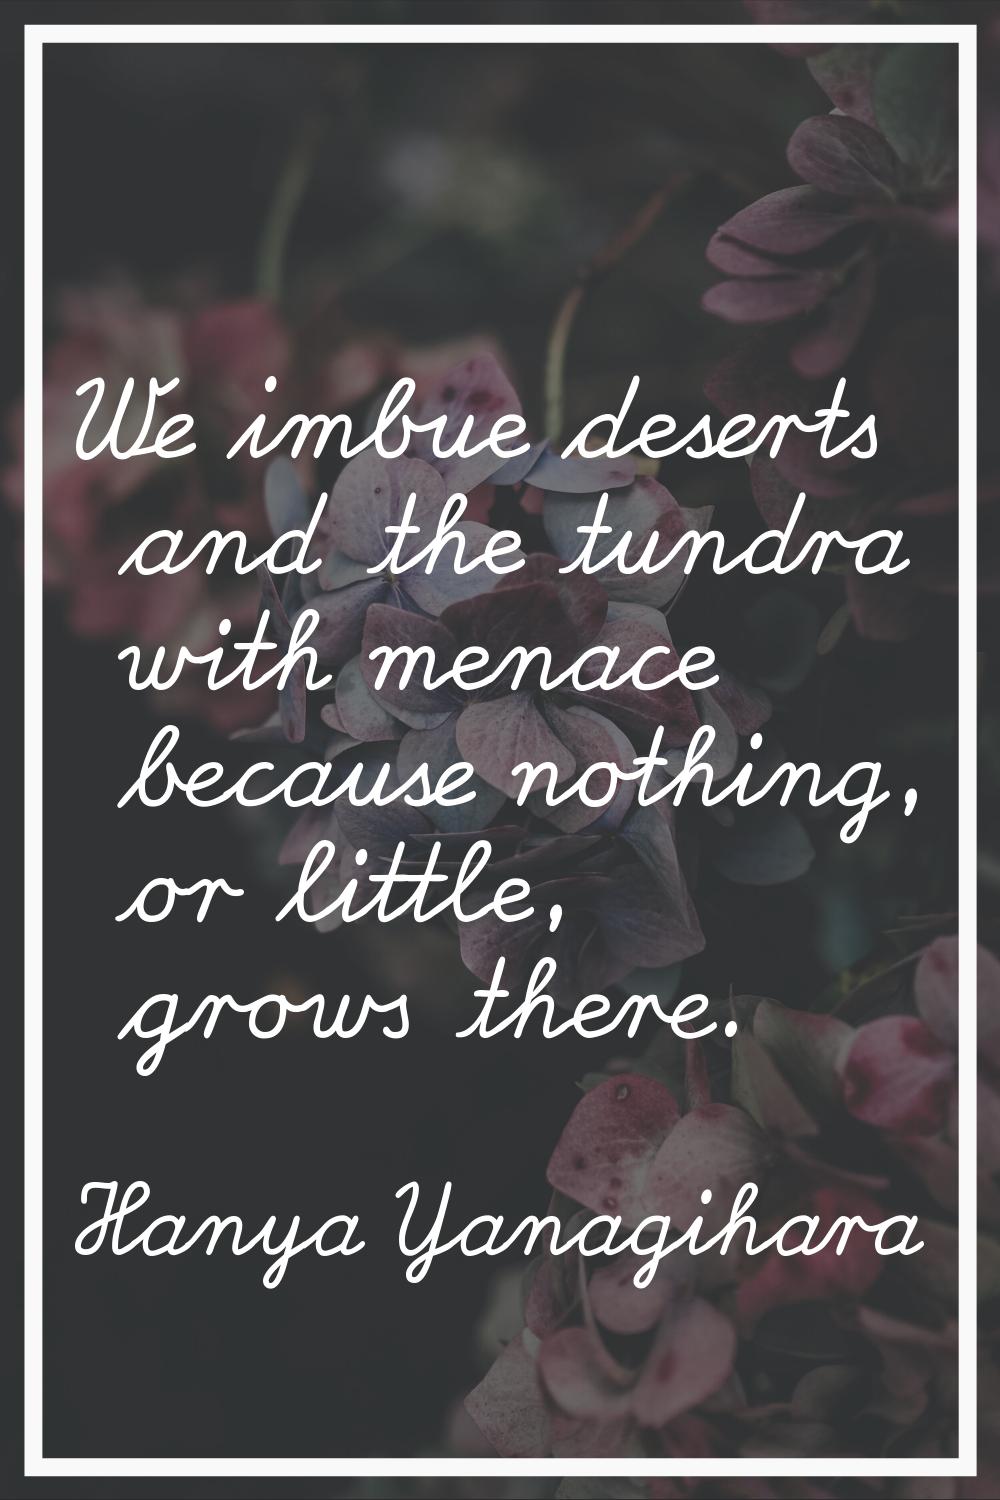 We imbue deserts and the tundra with menace because nothing, or little, grows there.